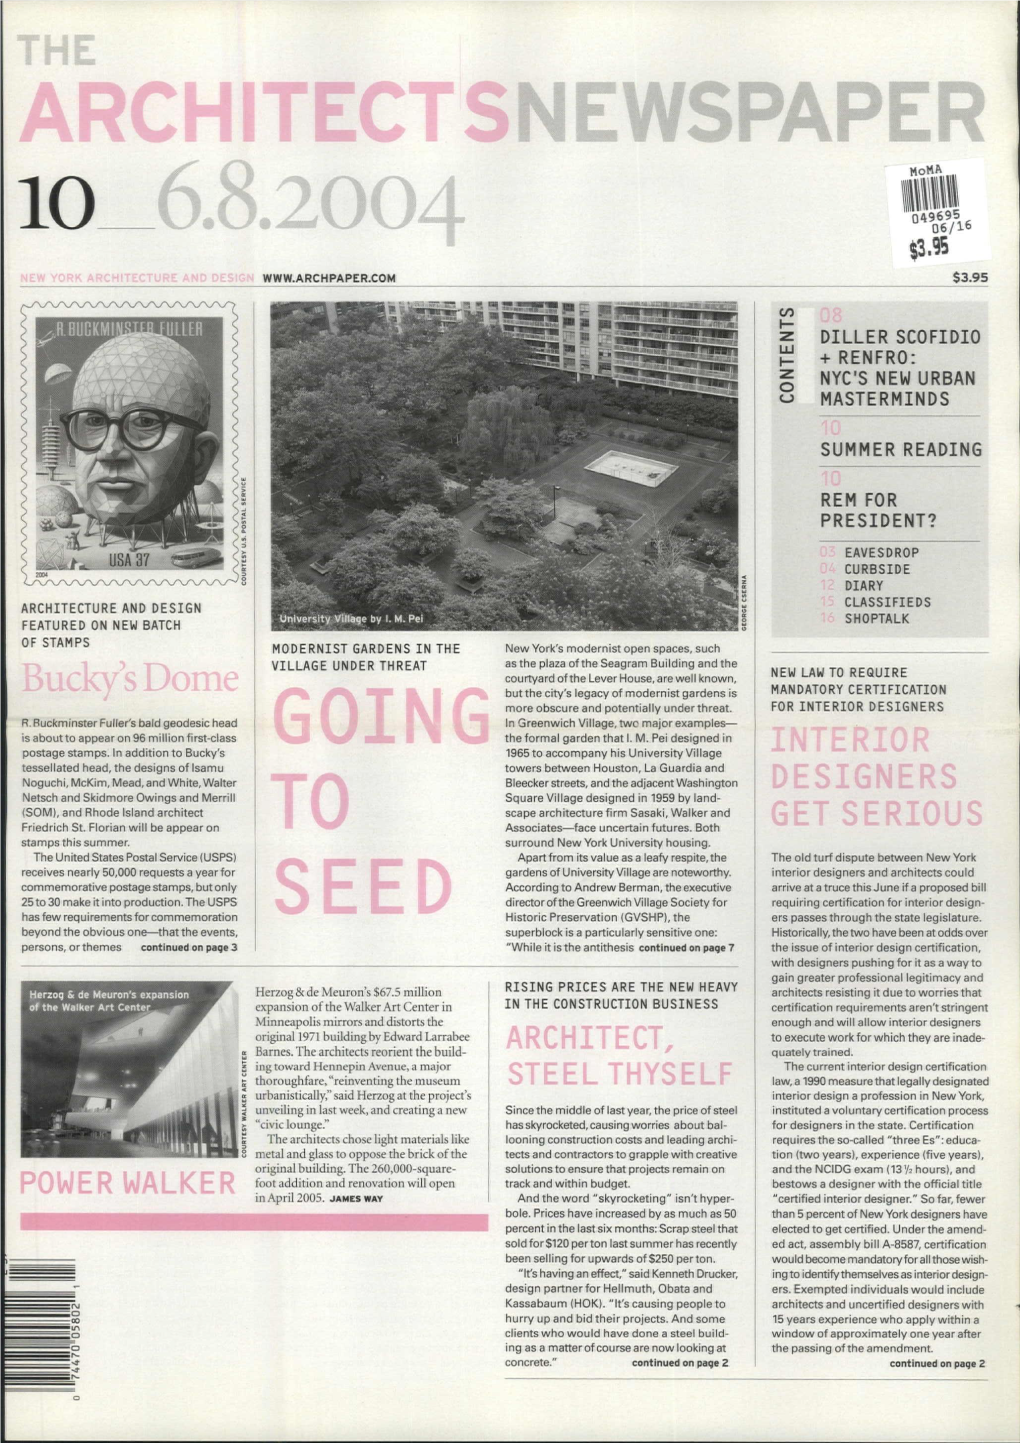 Architectsnewspaper 6.8.2004 Going to Seed